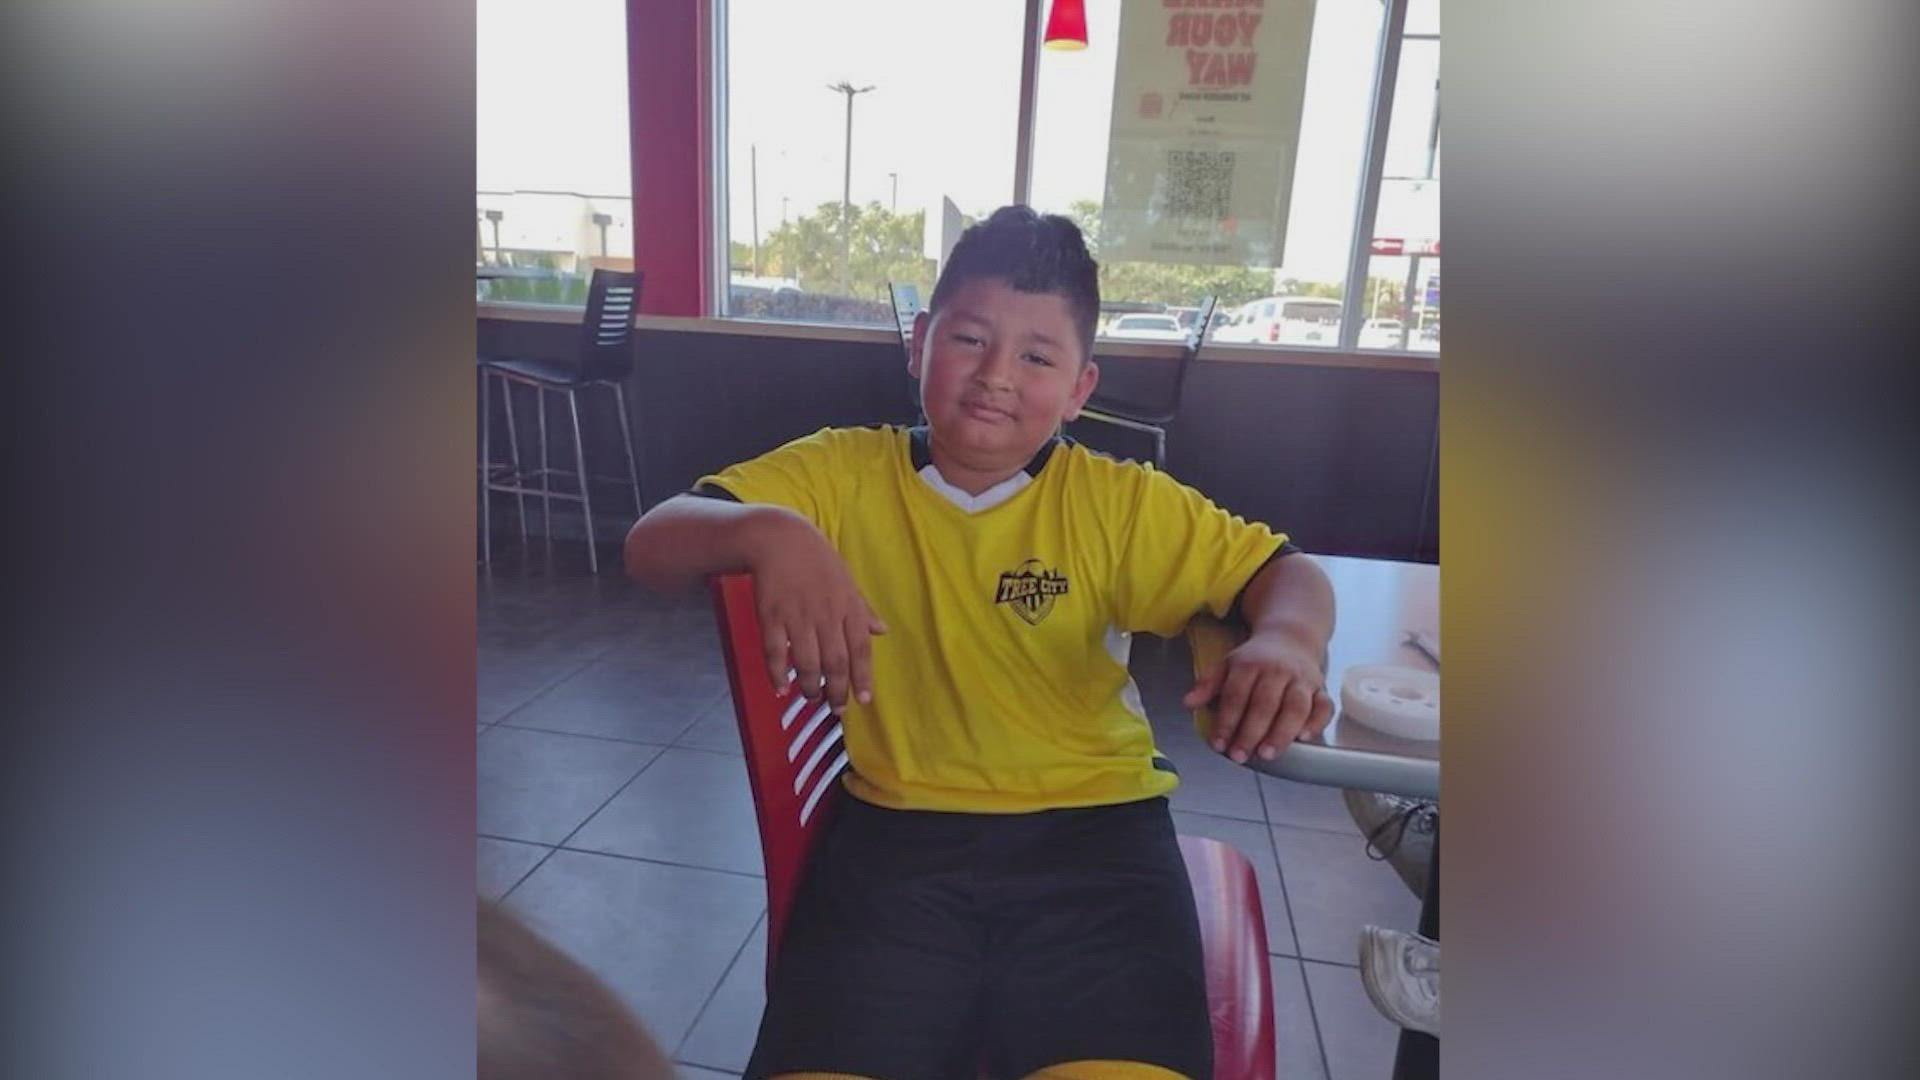 Xavier Lopez, who died in the Robb Elementary School shooting, was described as a bubbly young boy who loved life.